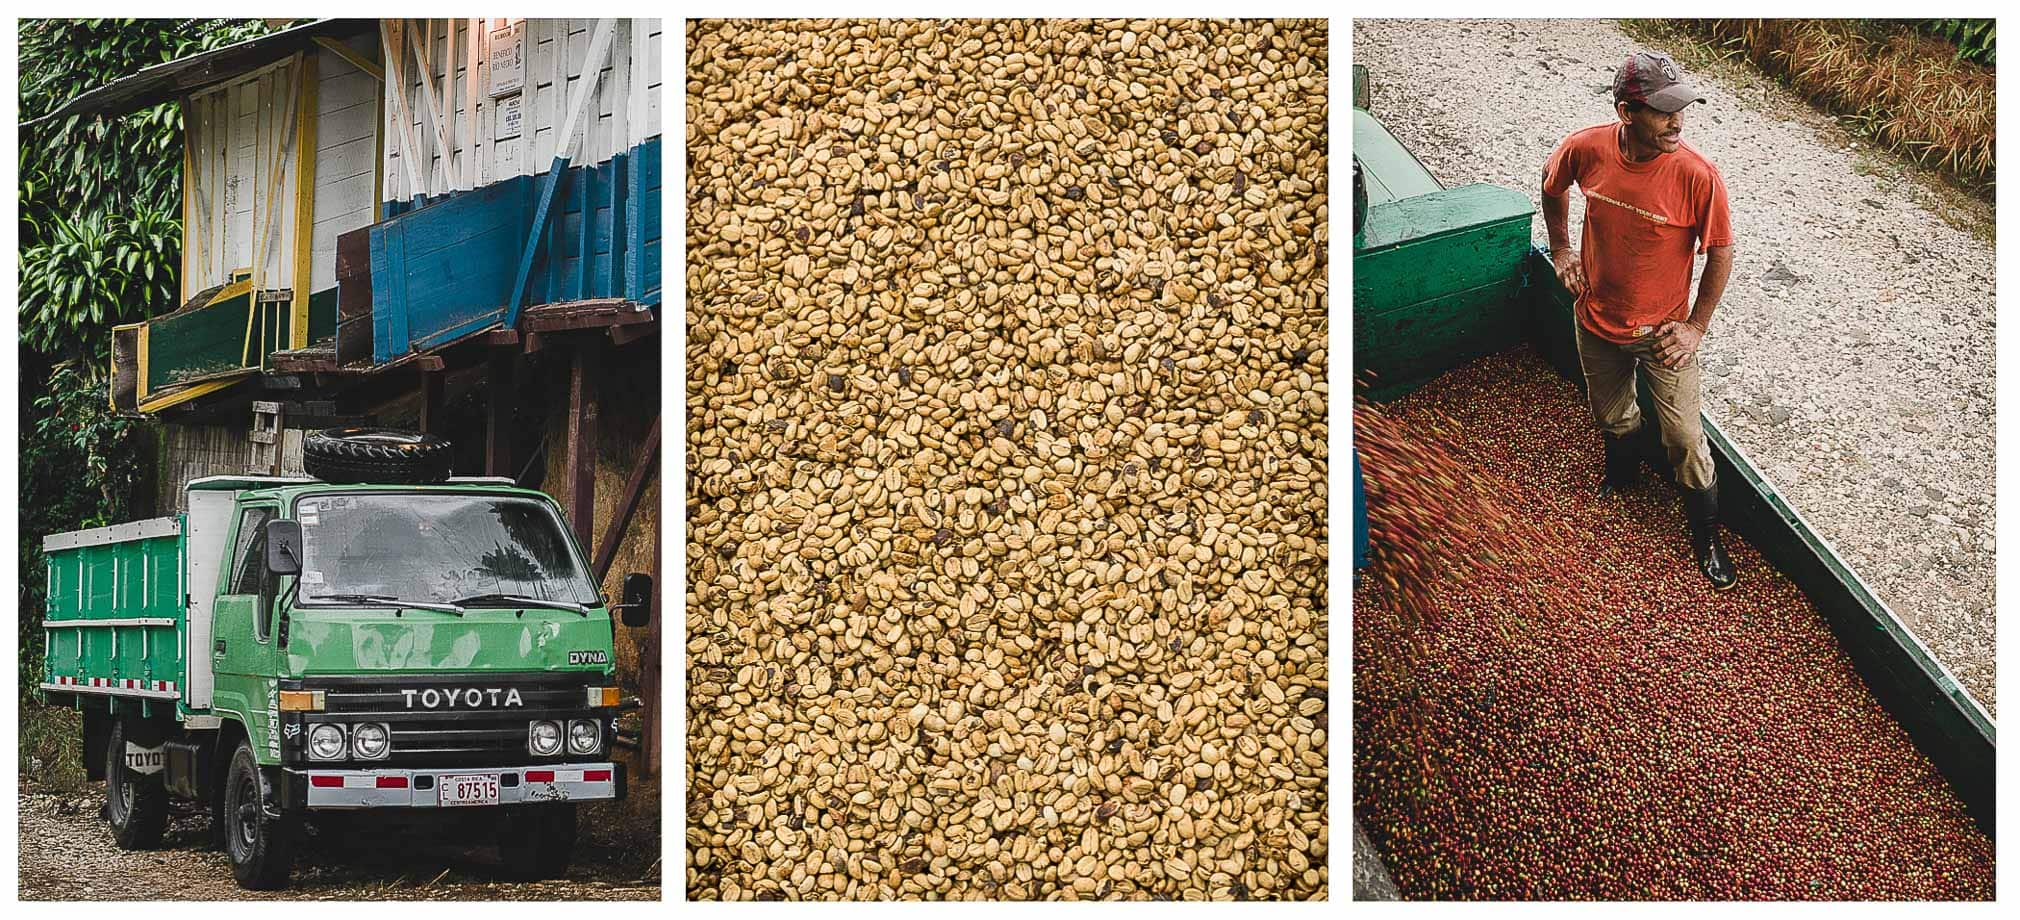 Different stages of coffee production.